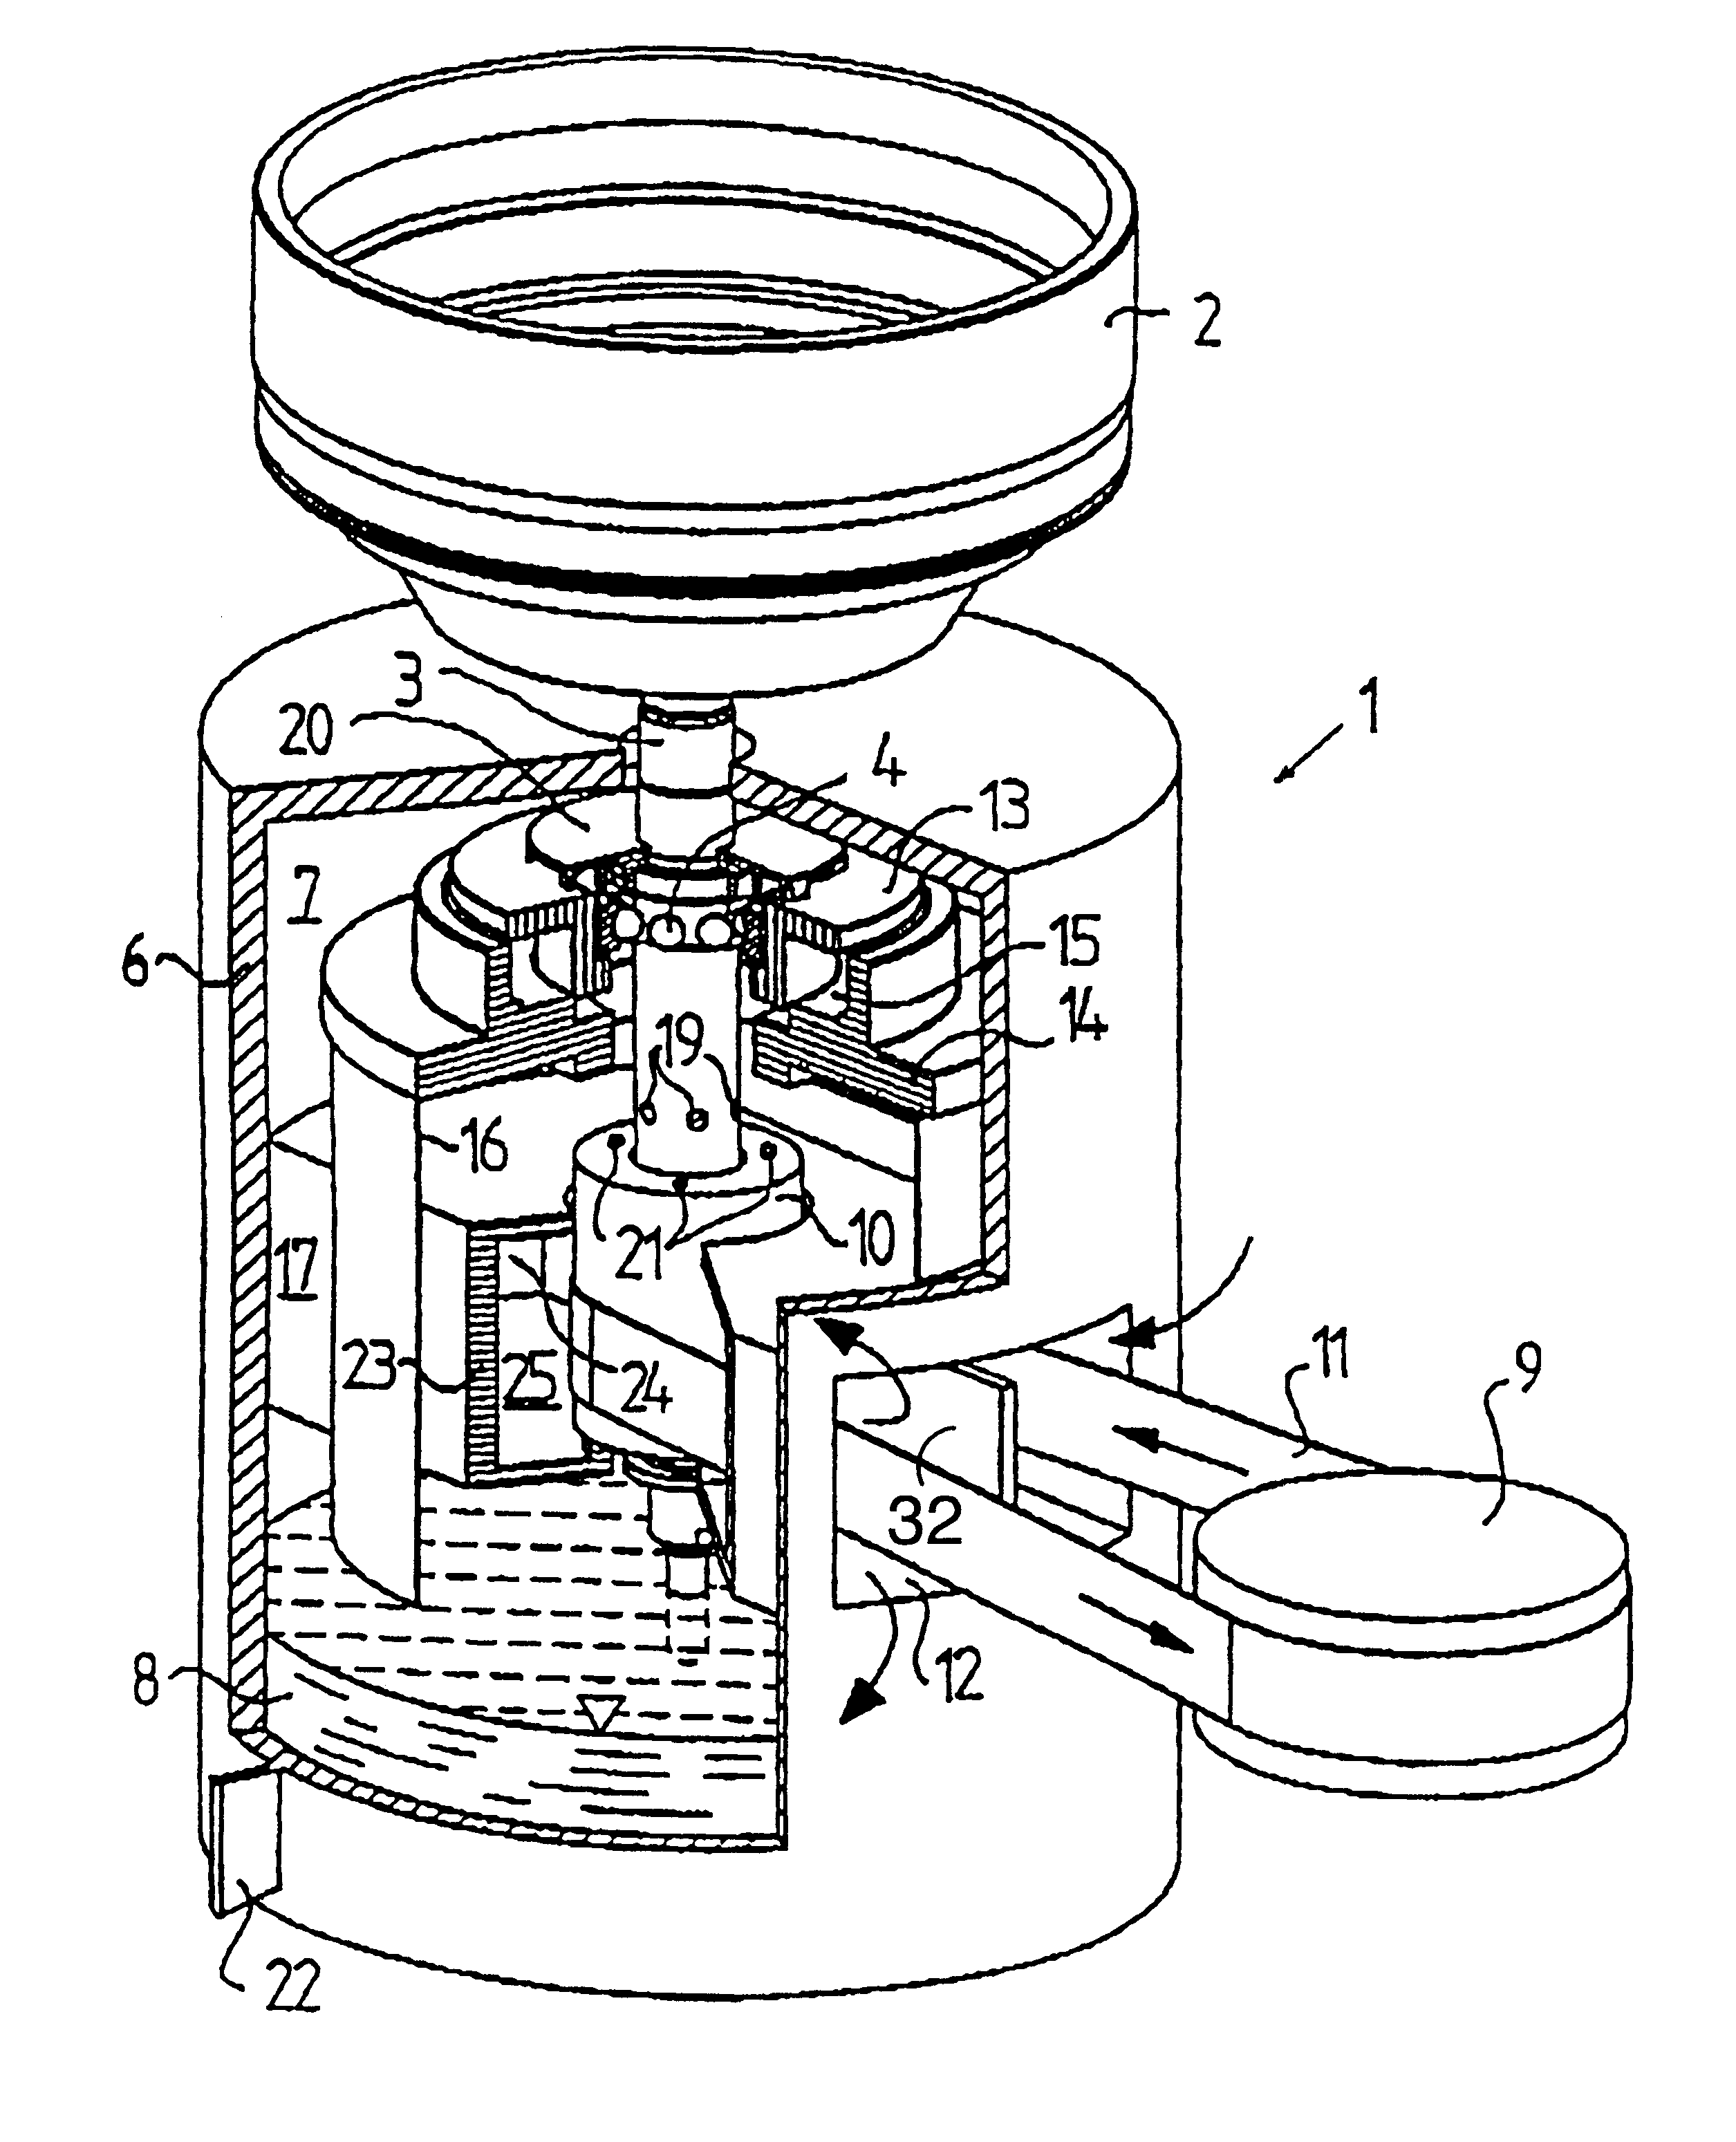 Drive unit for a centrifuge rotor of a centrifugal separator